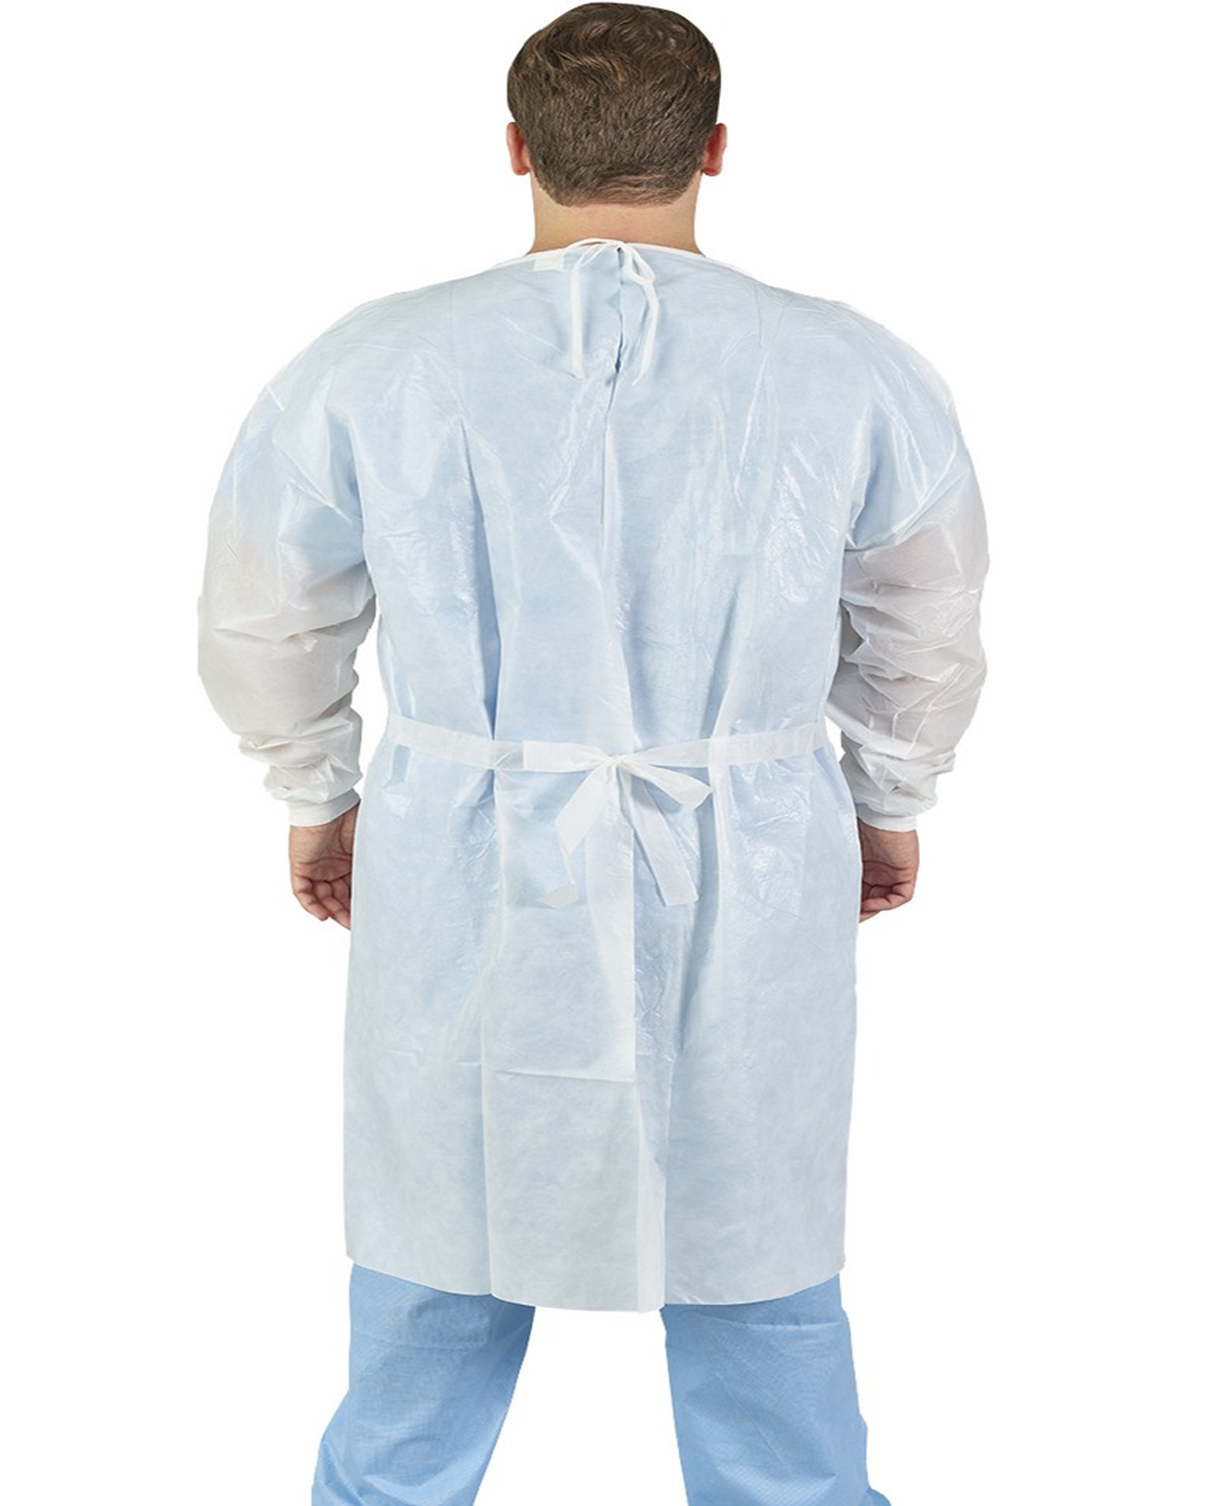 HALYARD* Poly-Coated Fluid Resistant Gowns